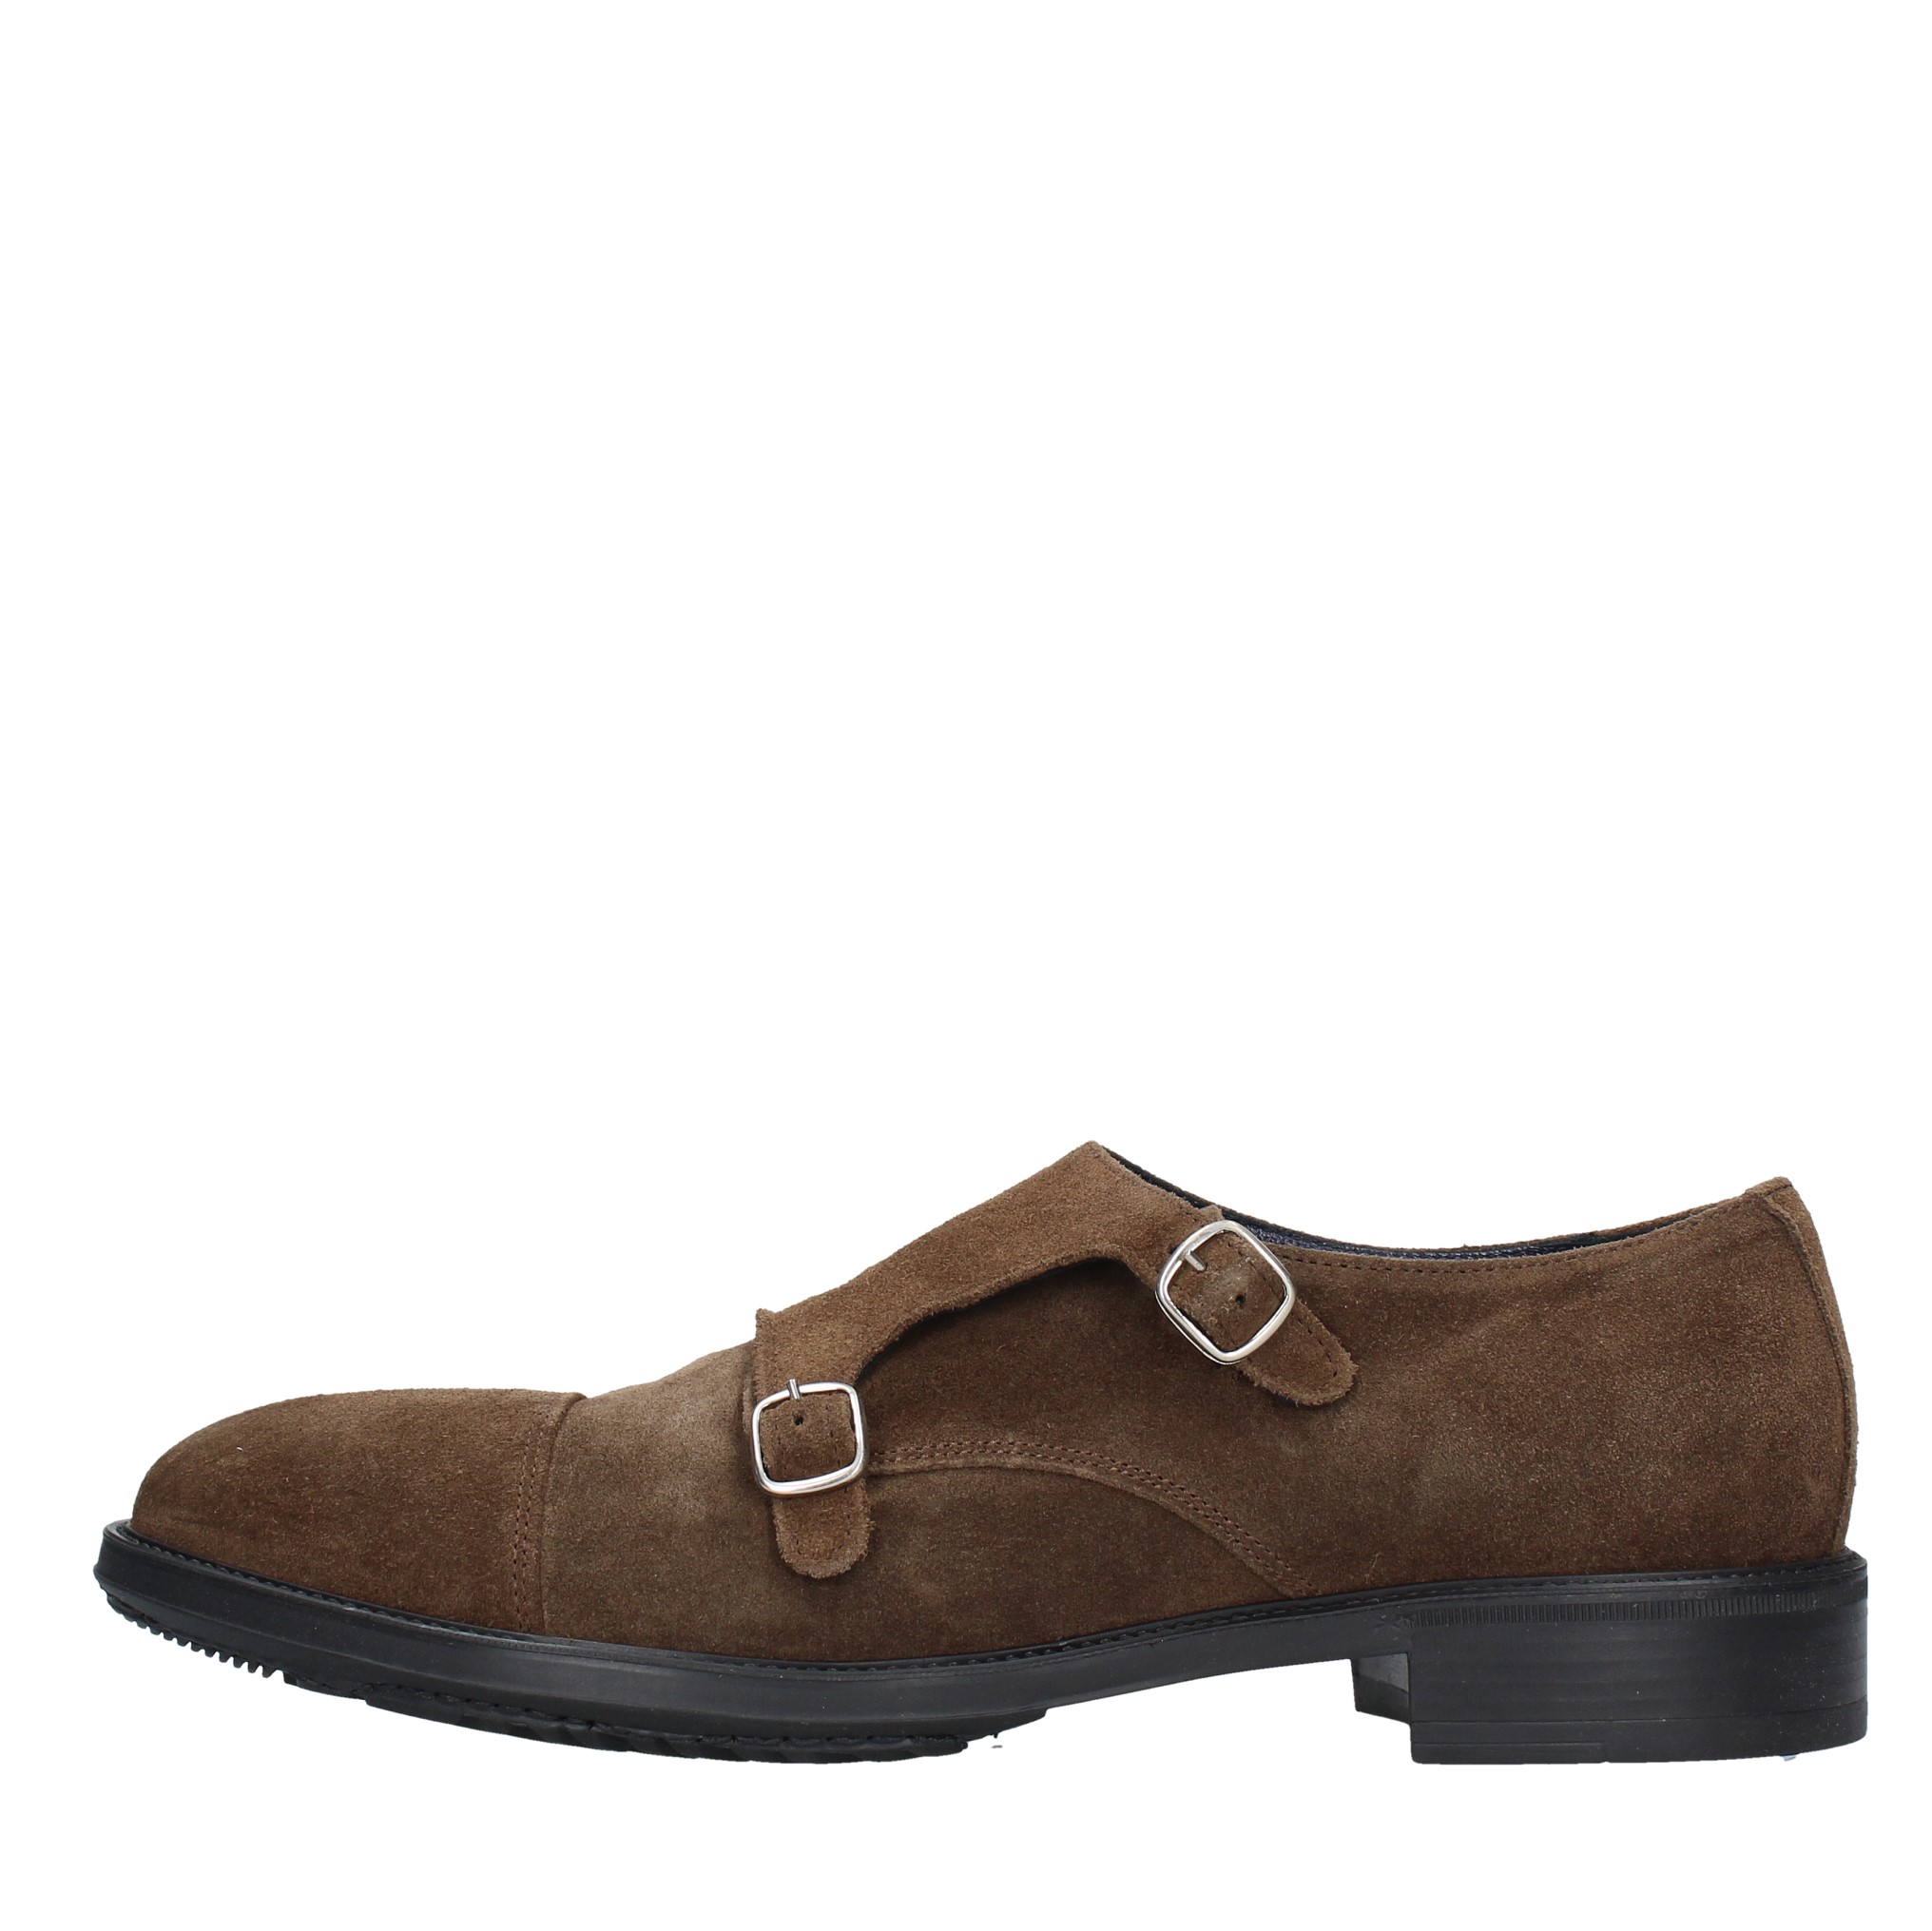 Loafers and slip-ons Brown - LEQARANT - Ginevra calzature